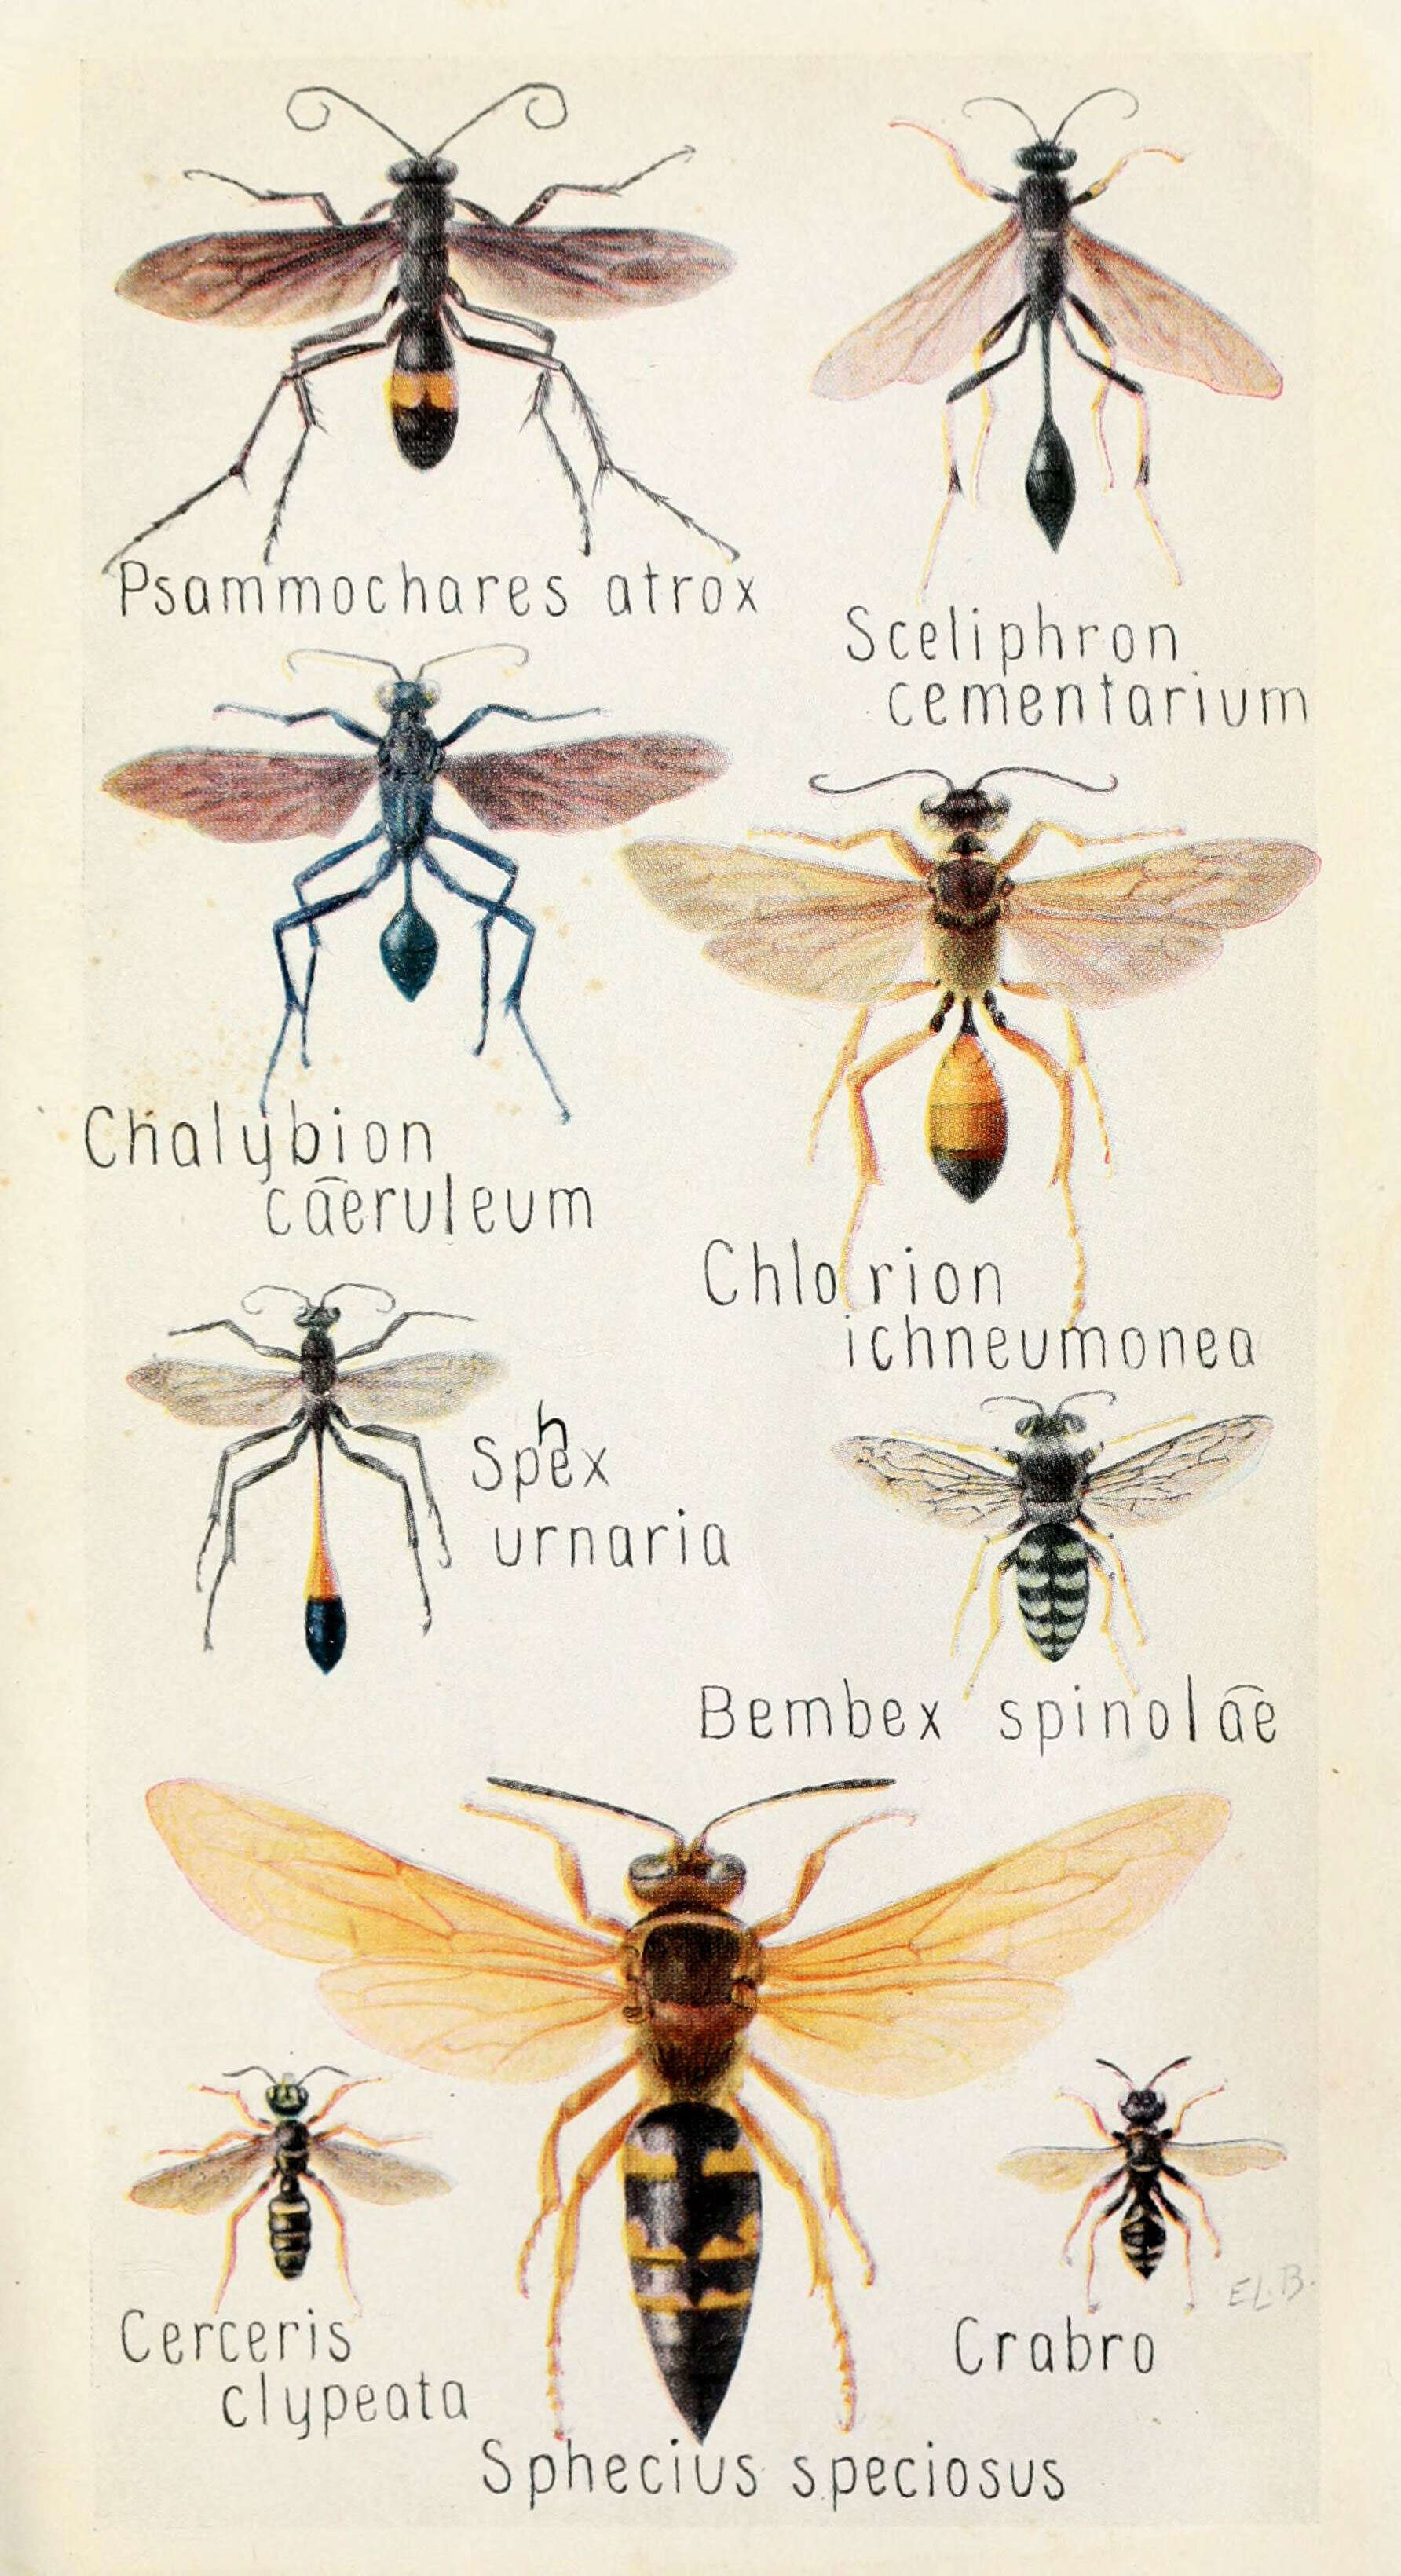 Image of wasps, bees, and ants